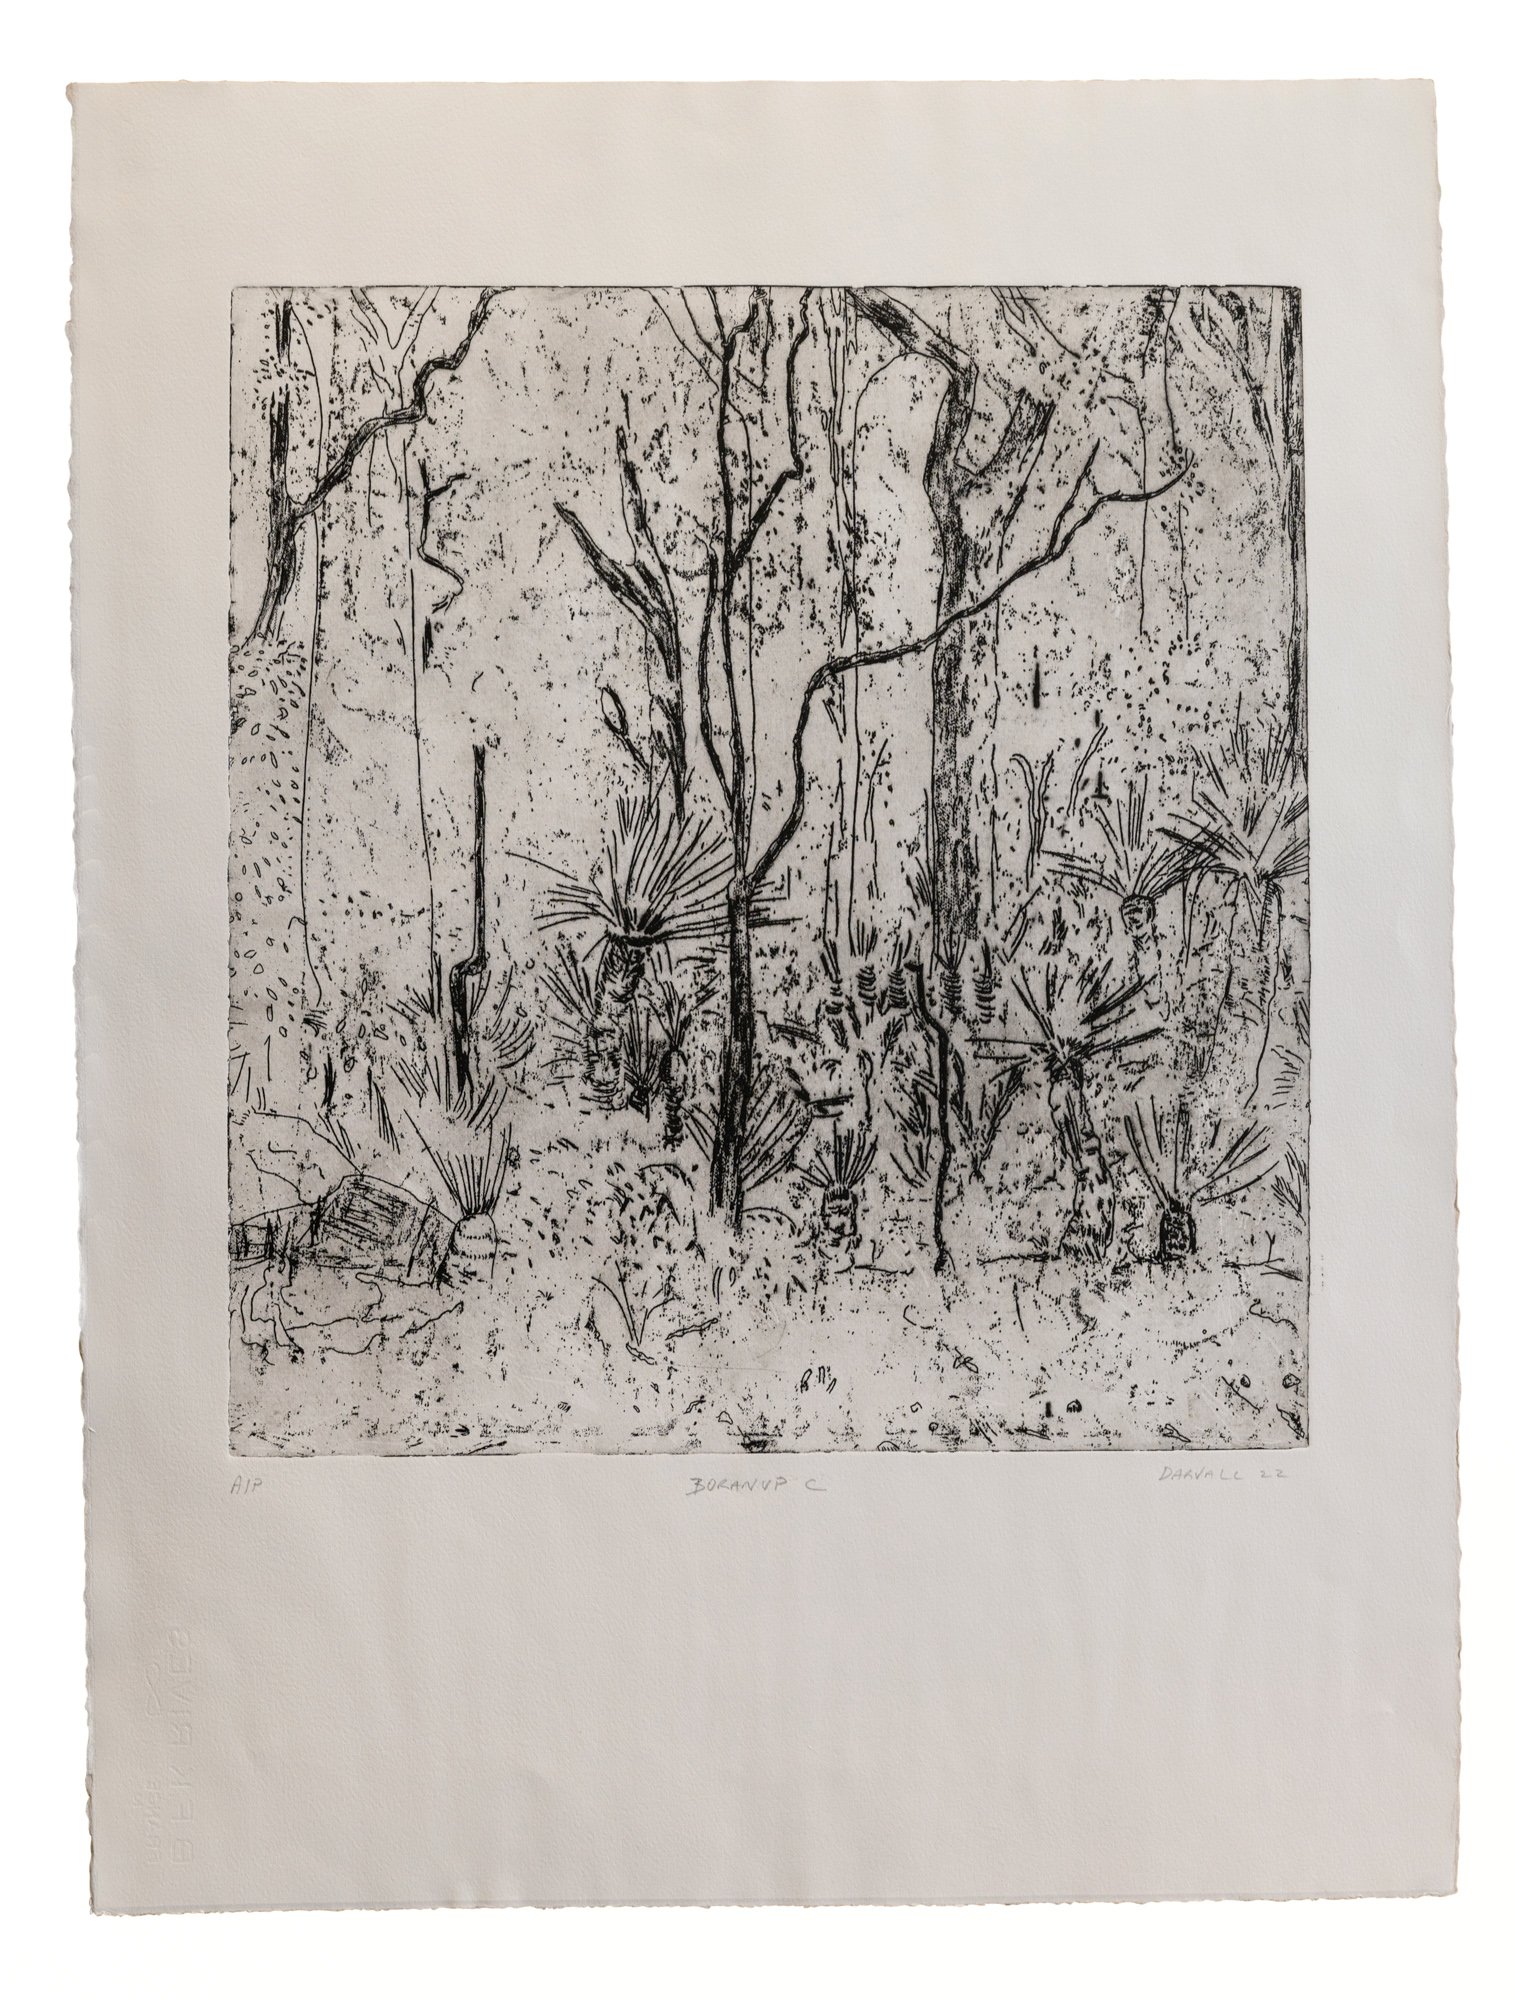   Boranup C, 2022, (No 3) 56 x 76 cm etching on  Hahneumle image size 45x50cm artist proof   edition of 20   